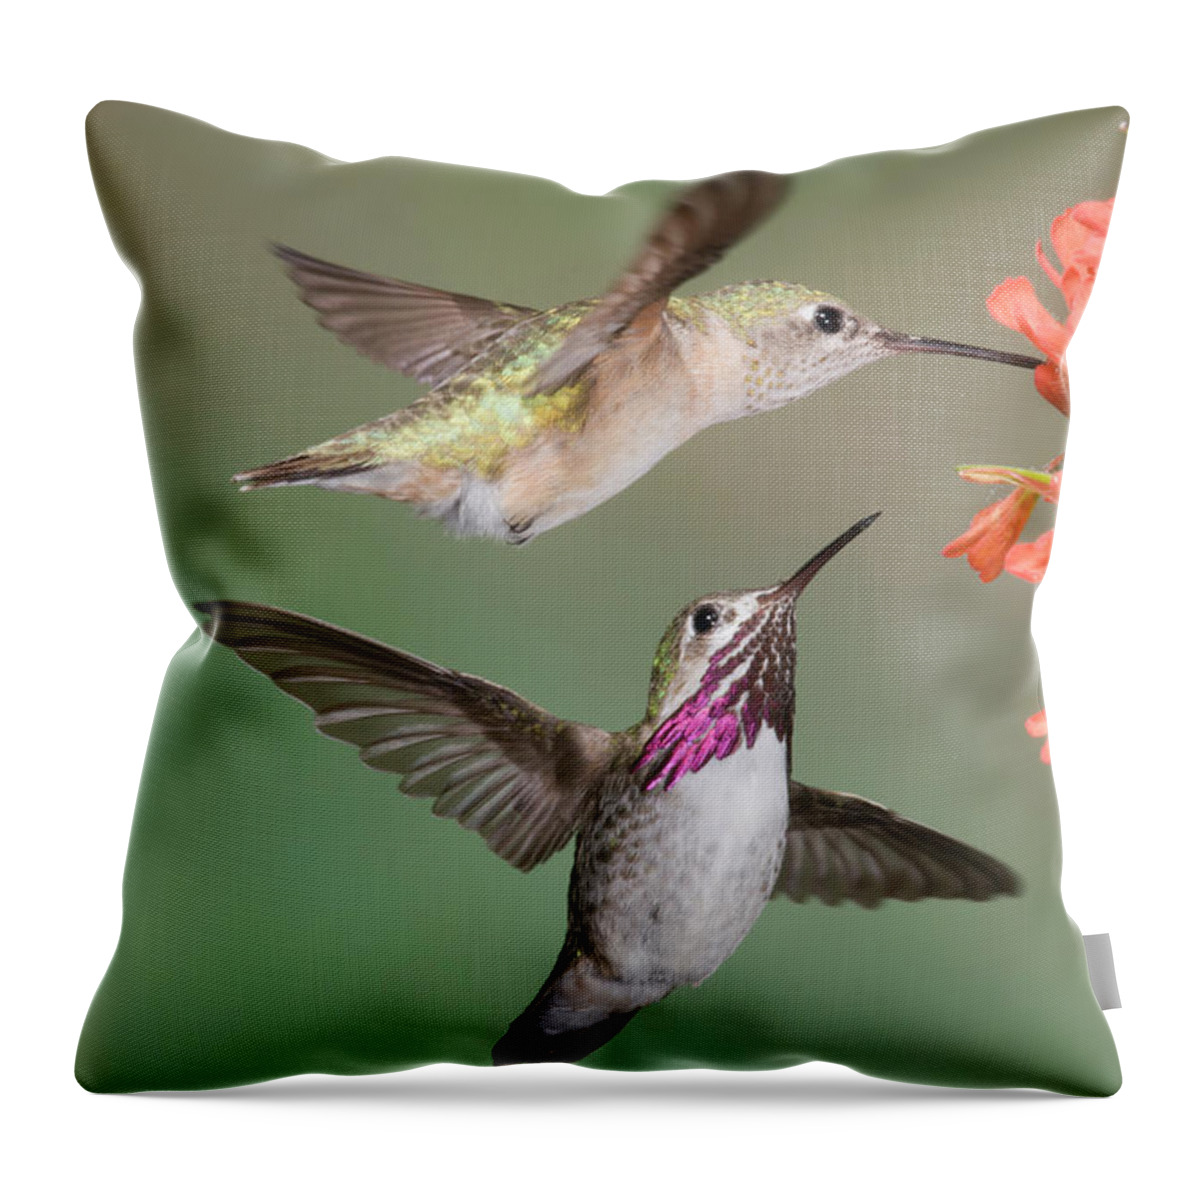 Animals In The Wild Throw Pillow featuring the photograph Calliope Hummingbirds by Tom Walker